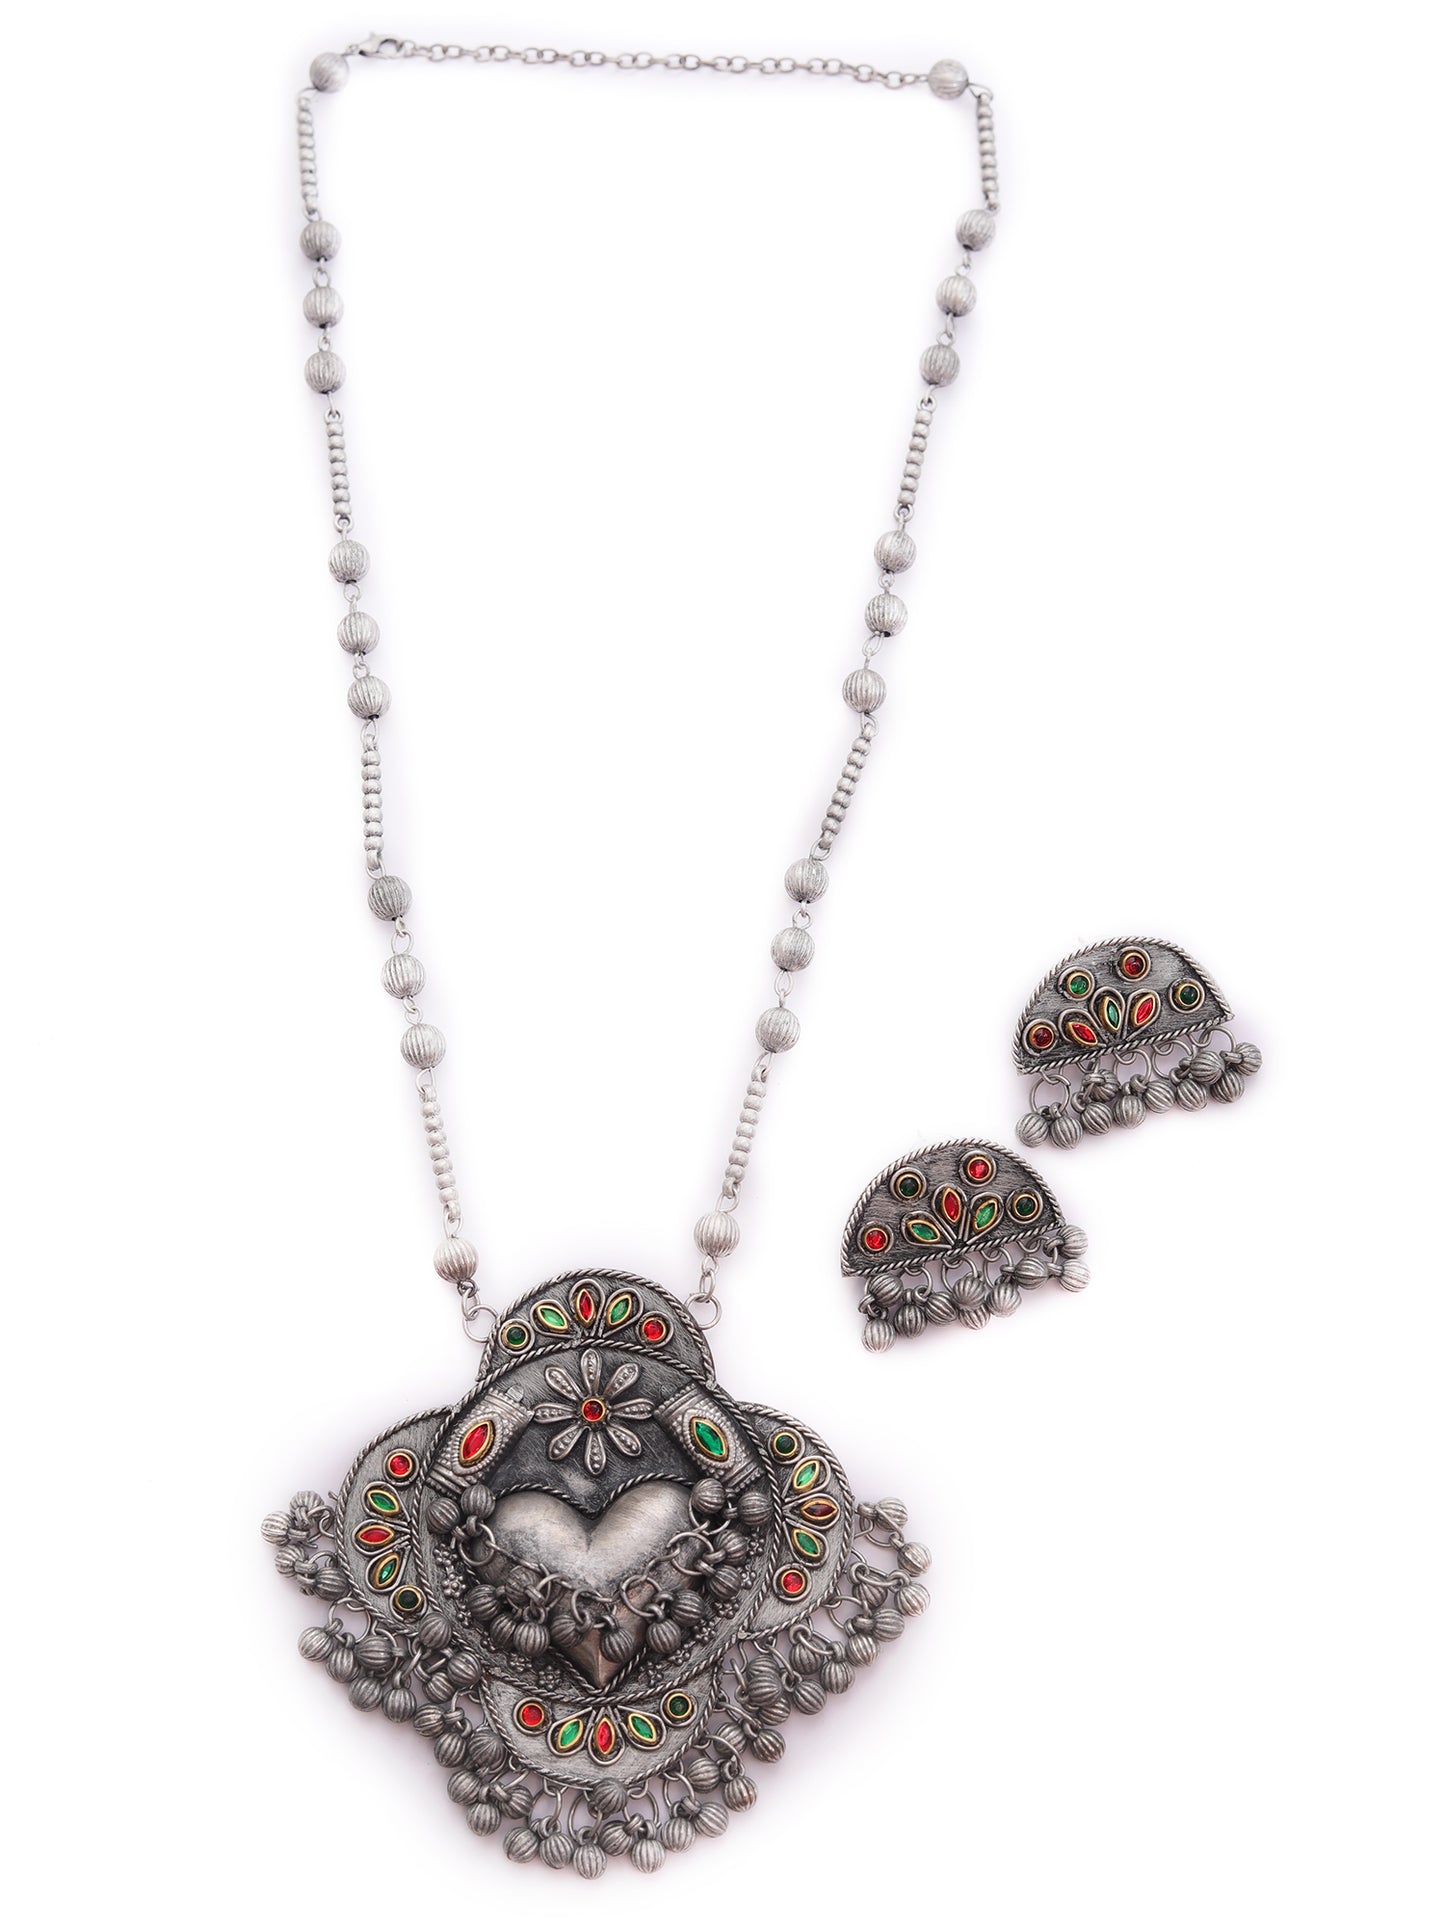 The Gutsy Metallic Trinky Heart Necklace Set in Green & Red Stone